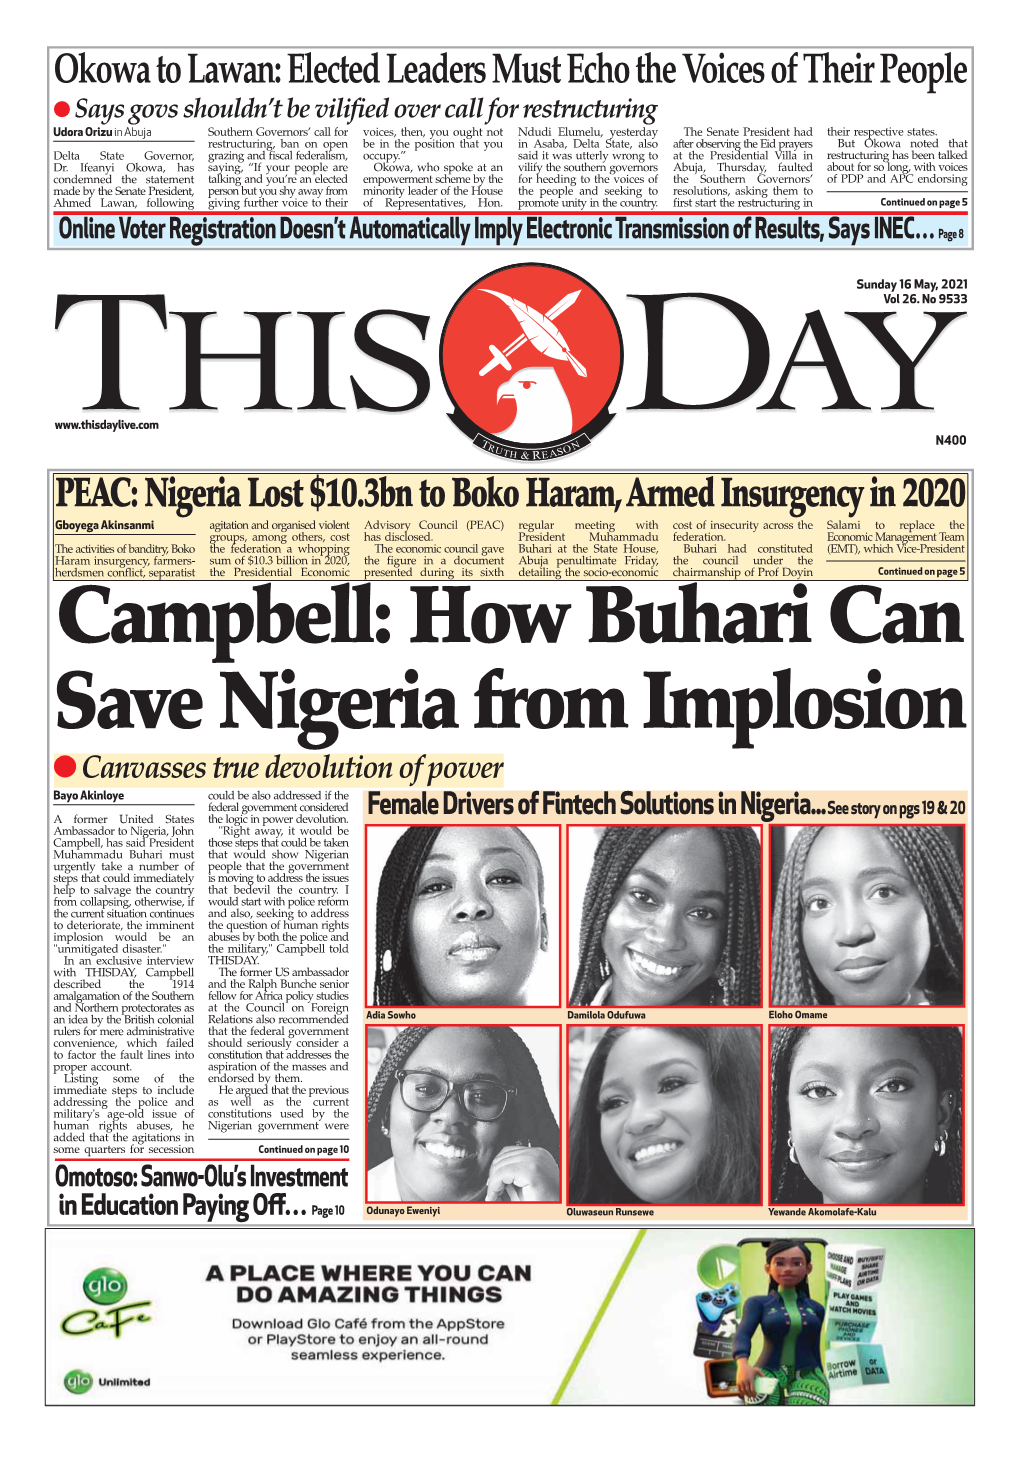 Campbell: How Buhari Can Save Nigeria from Implosion